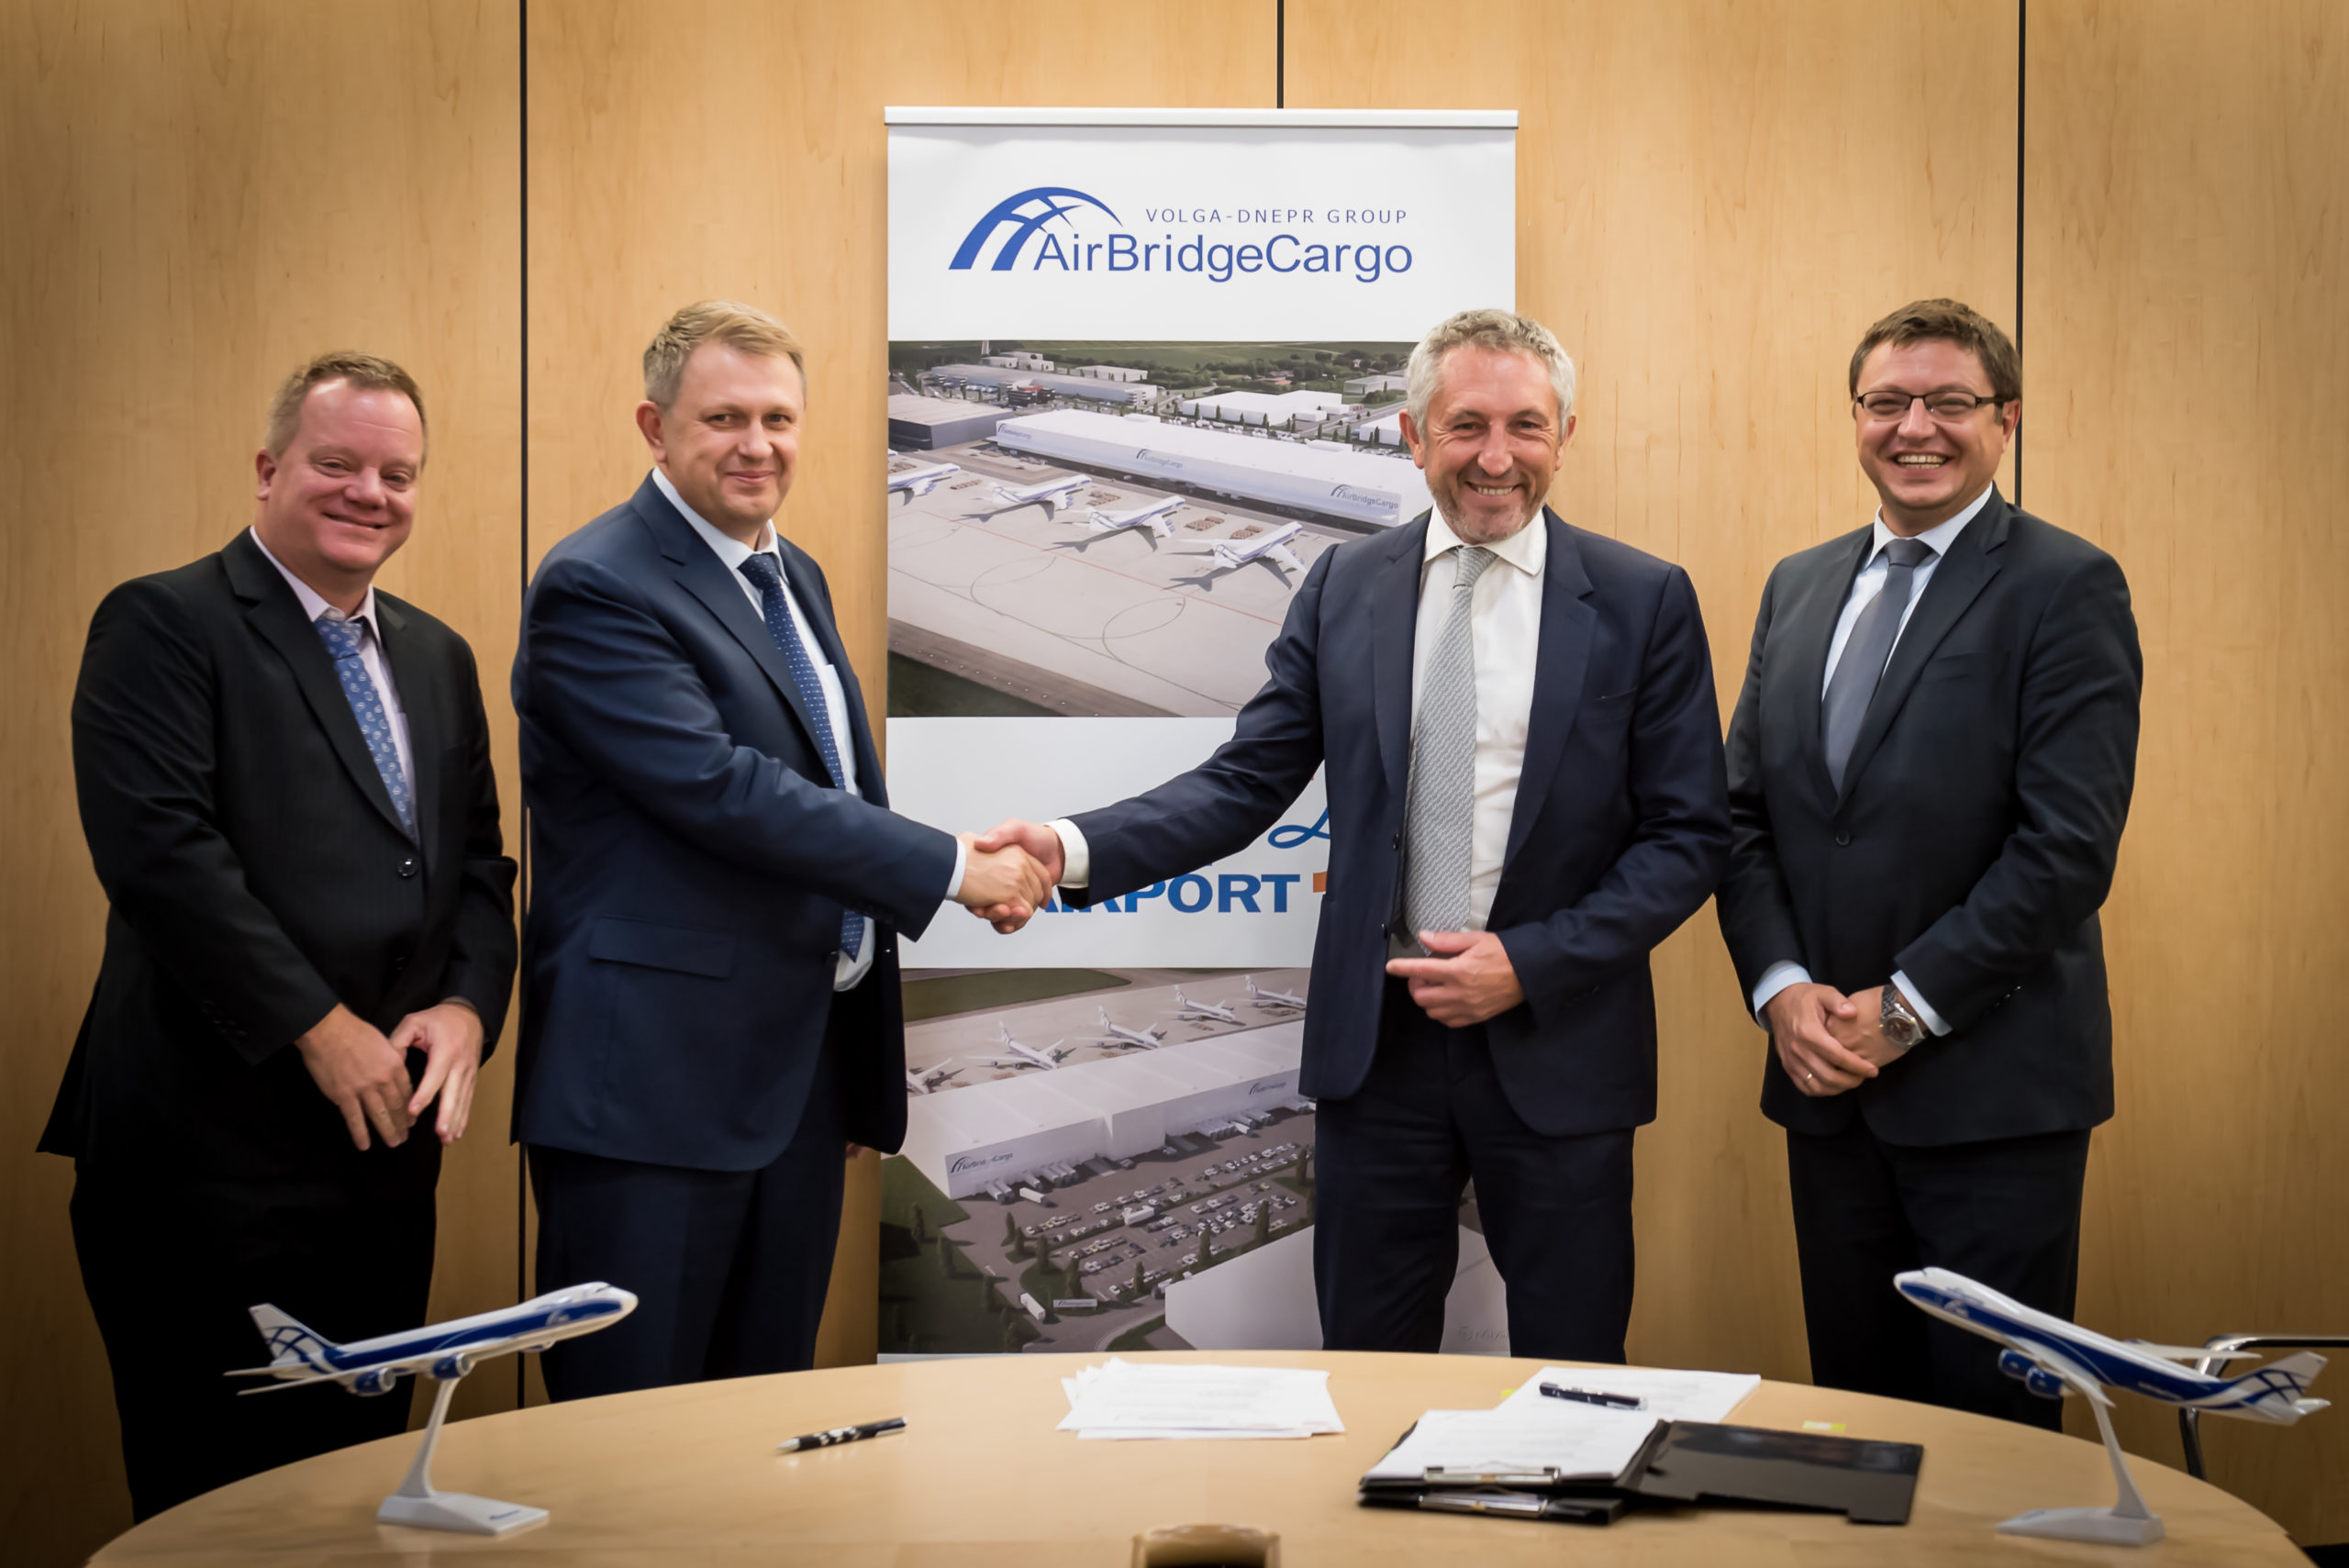 Left to right: Steven Verhasselt, VP business development at Liege Airport, - Sergey Lazarev, General Director, AirBridgeCargo Airlines, Luc Partoune, CEO of Liege Airport, and Andrey Andreev, Vice President, Europe, AirBridgeCargo Airlines